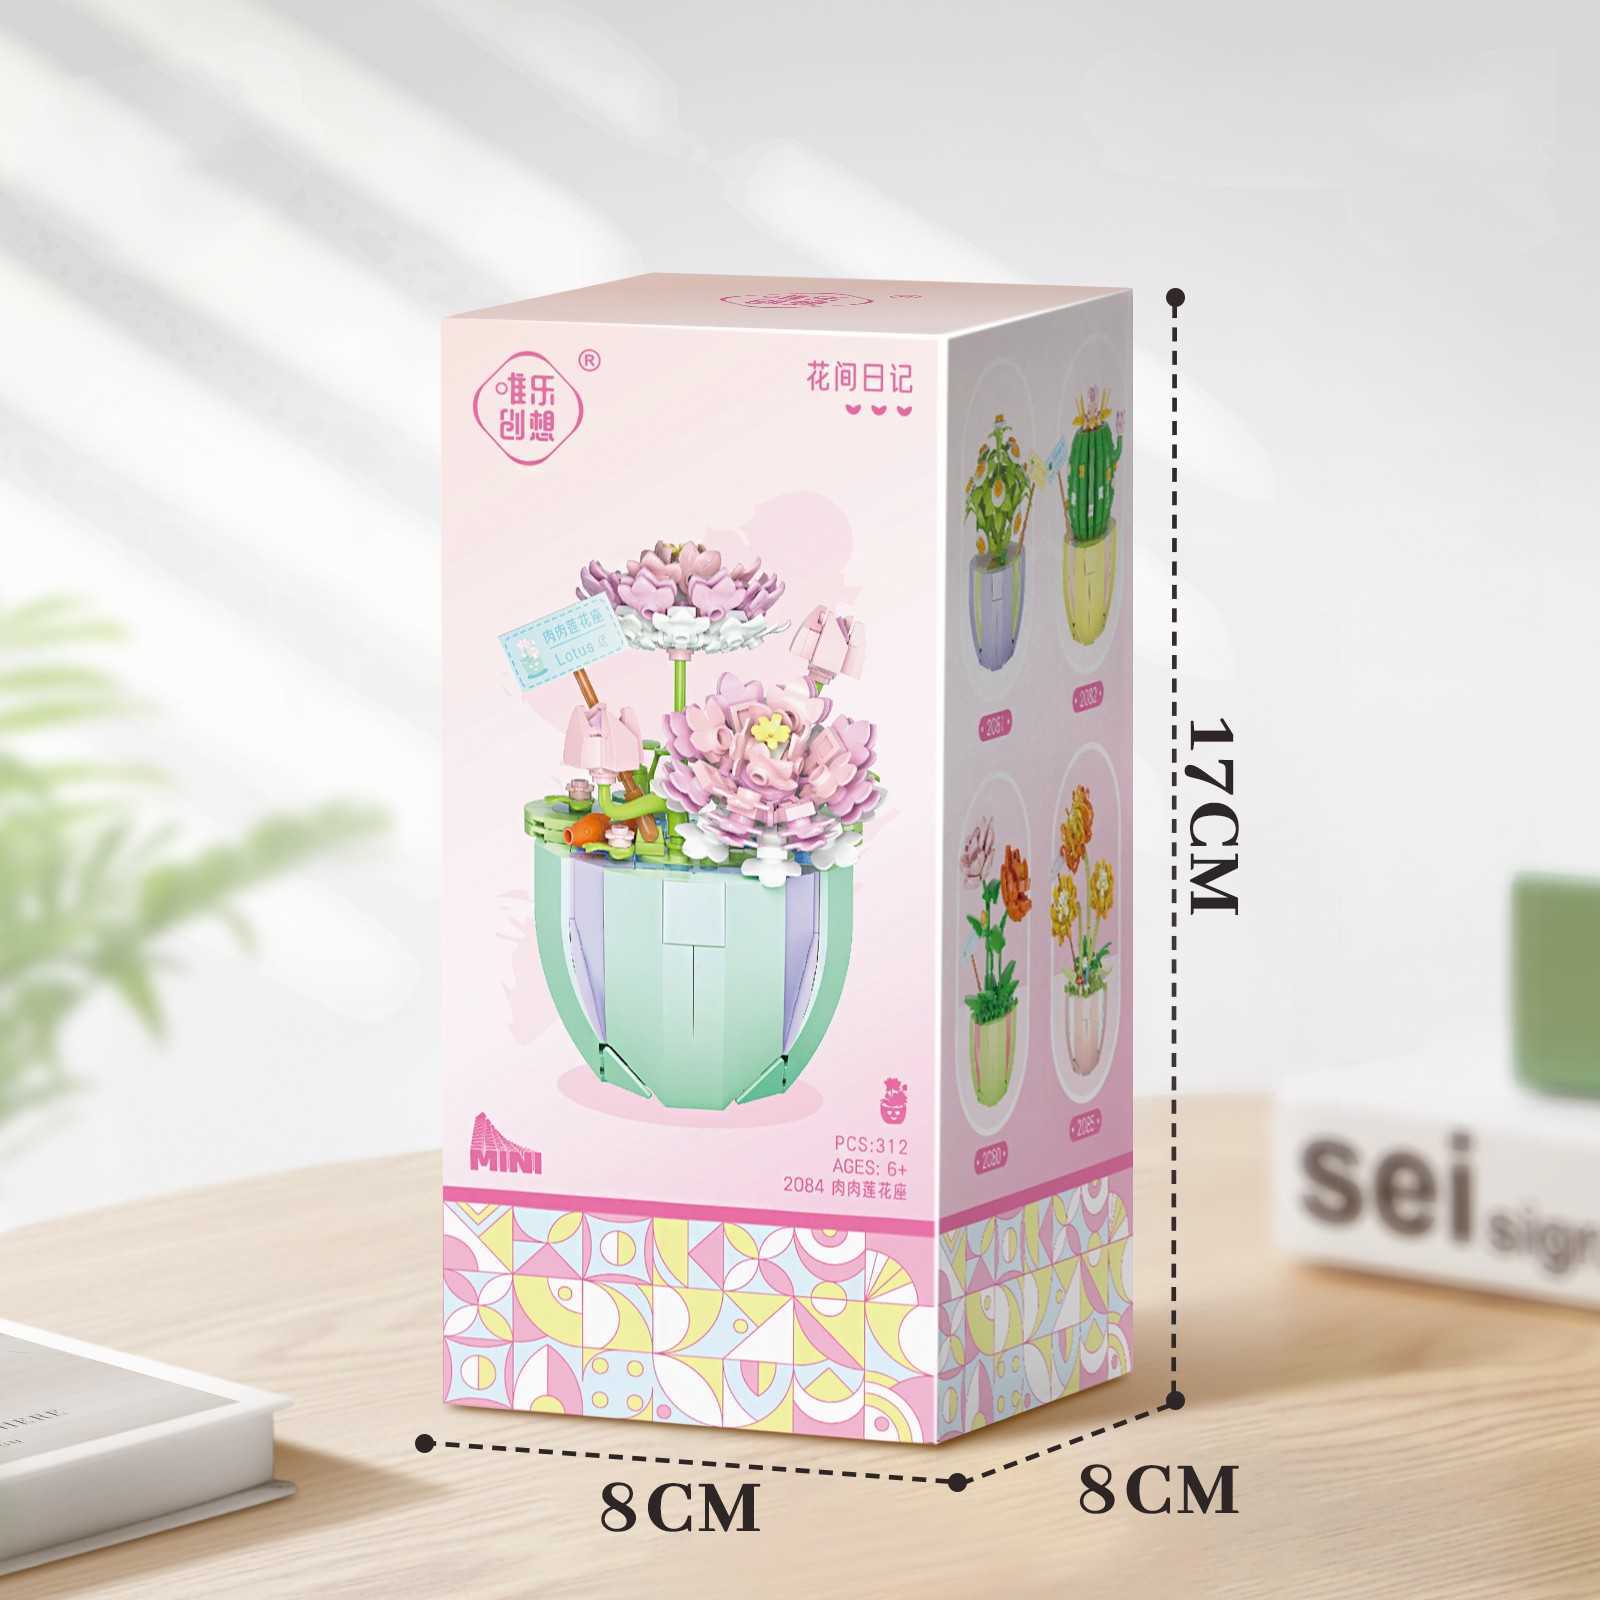 Blocks Building Block Bouquet 3D Model Toy Home Decoration Plant Potted Lotus Flower Assembly Brick Girl Toy Child Gift